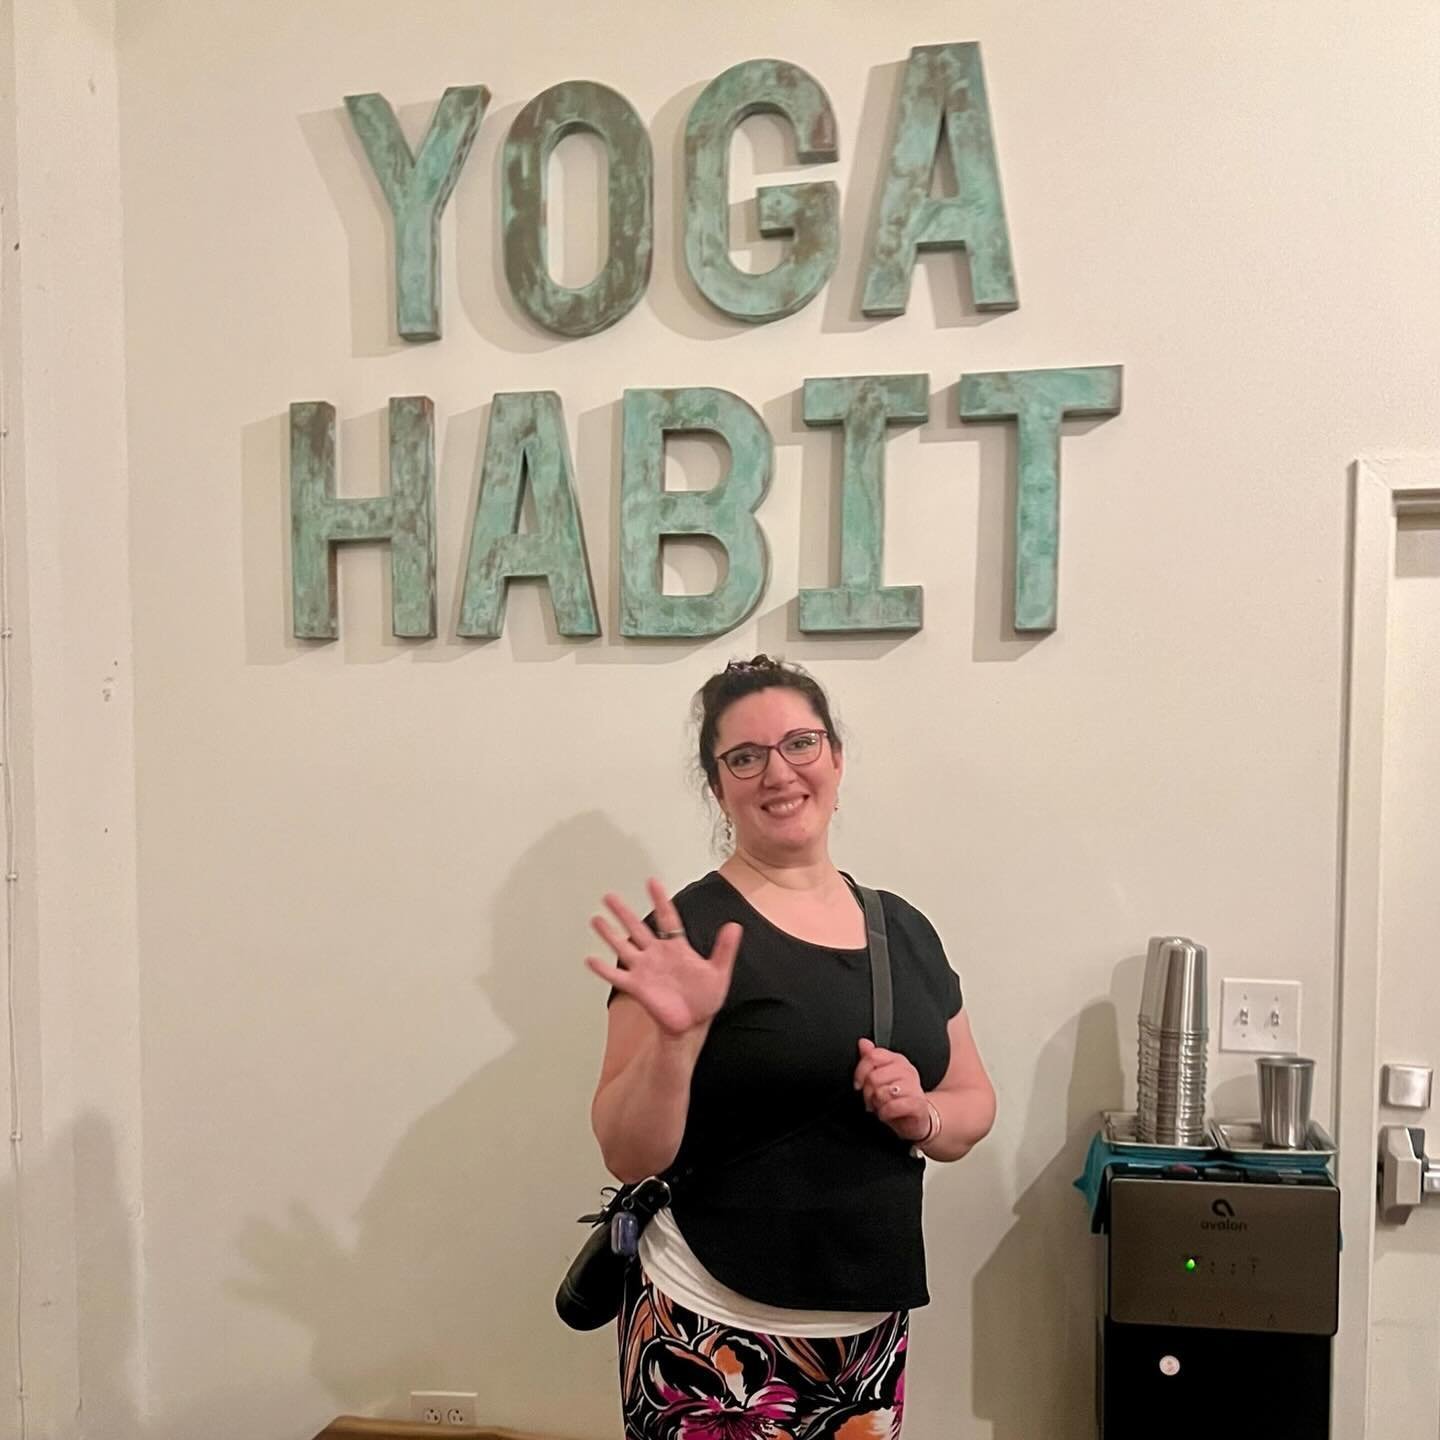 We&rsquo;re so thankful to @thedancingyogini for serving our community through our Slow Flow + Restore classes since 2017! She&rsquo;s moving in a few weeks and has to say goodbye. Diana has always loved the energy of these classes and connecting wit